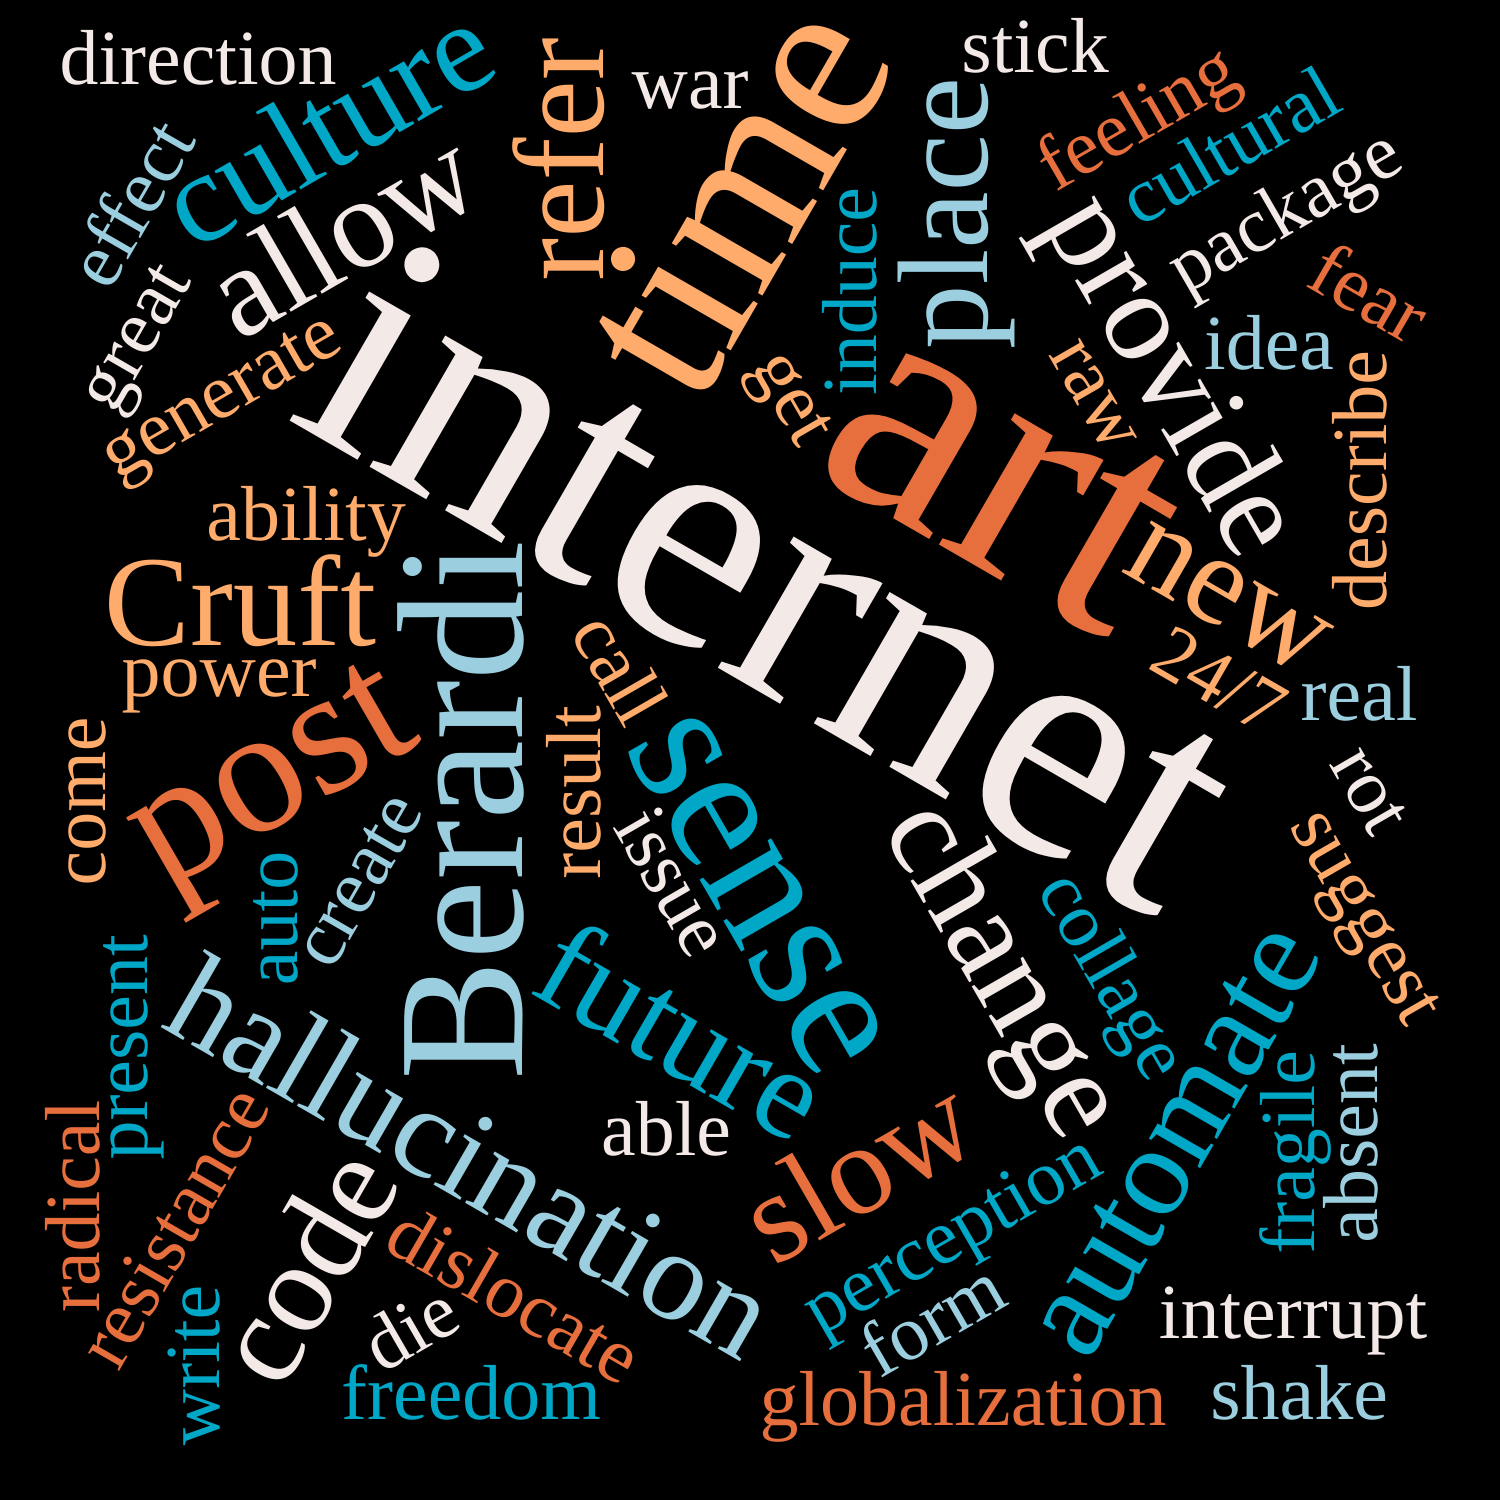 word cloud of statement